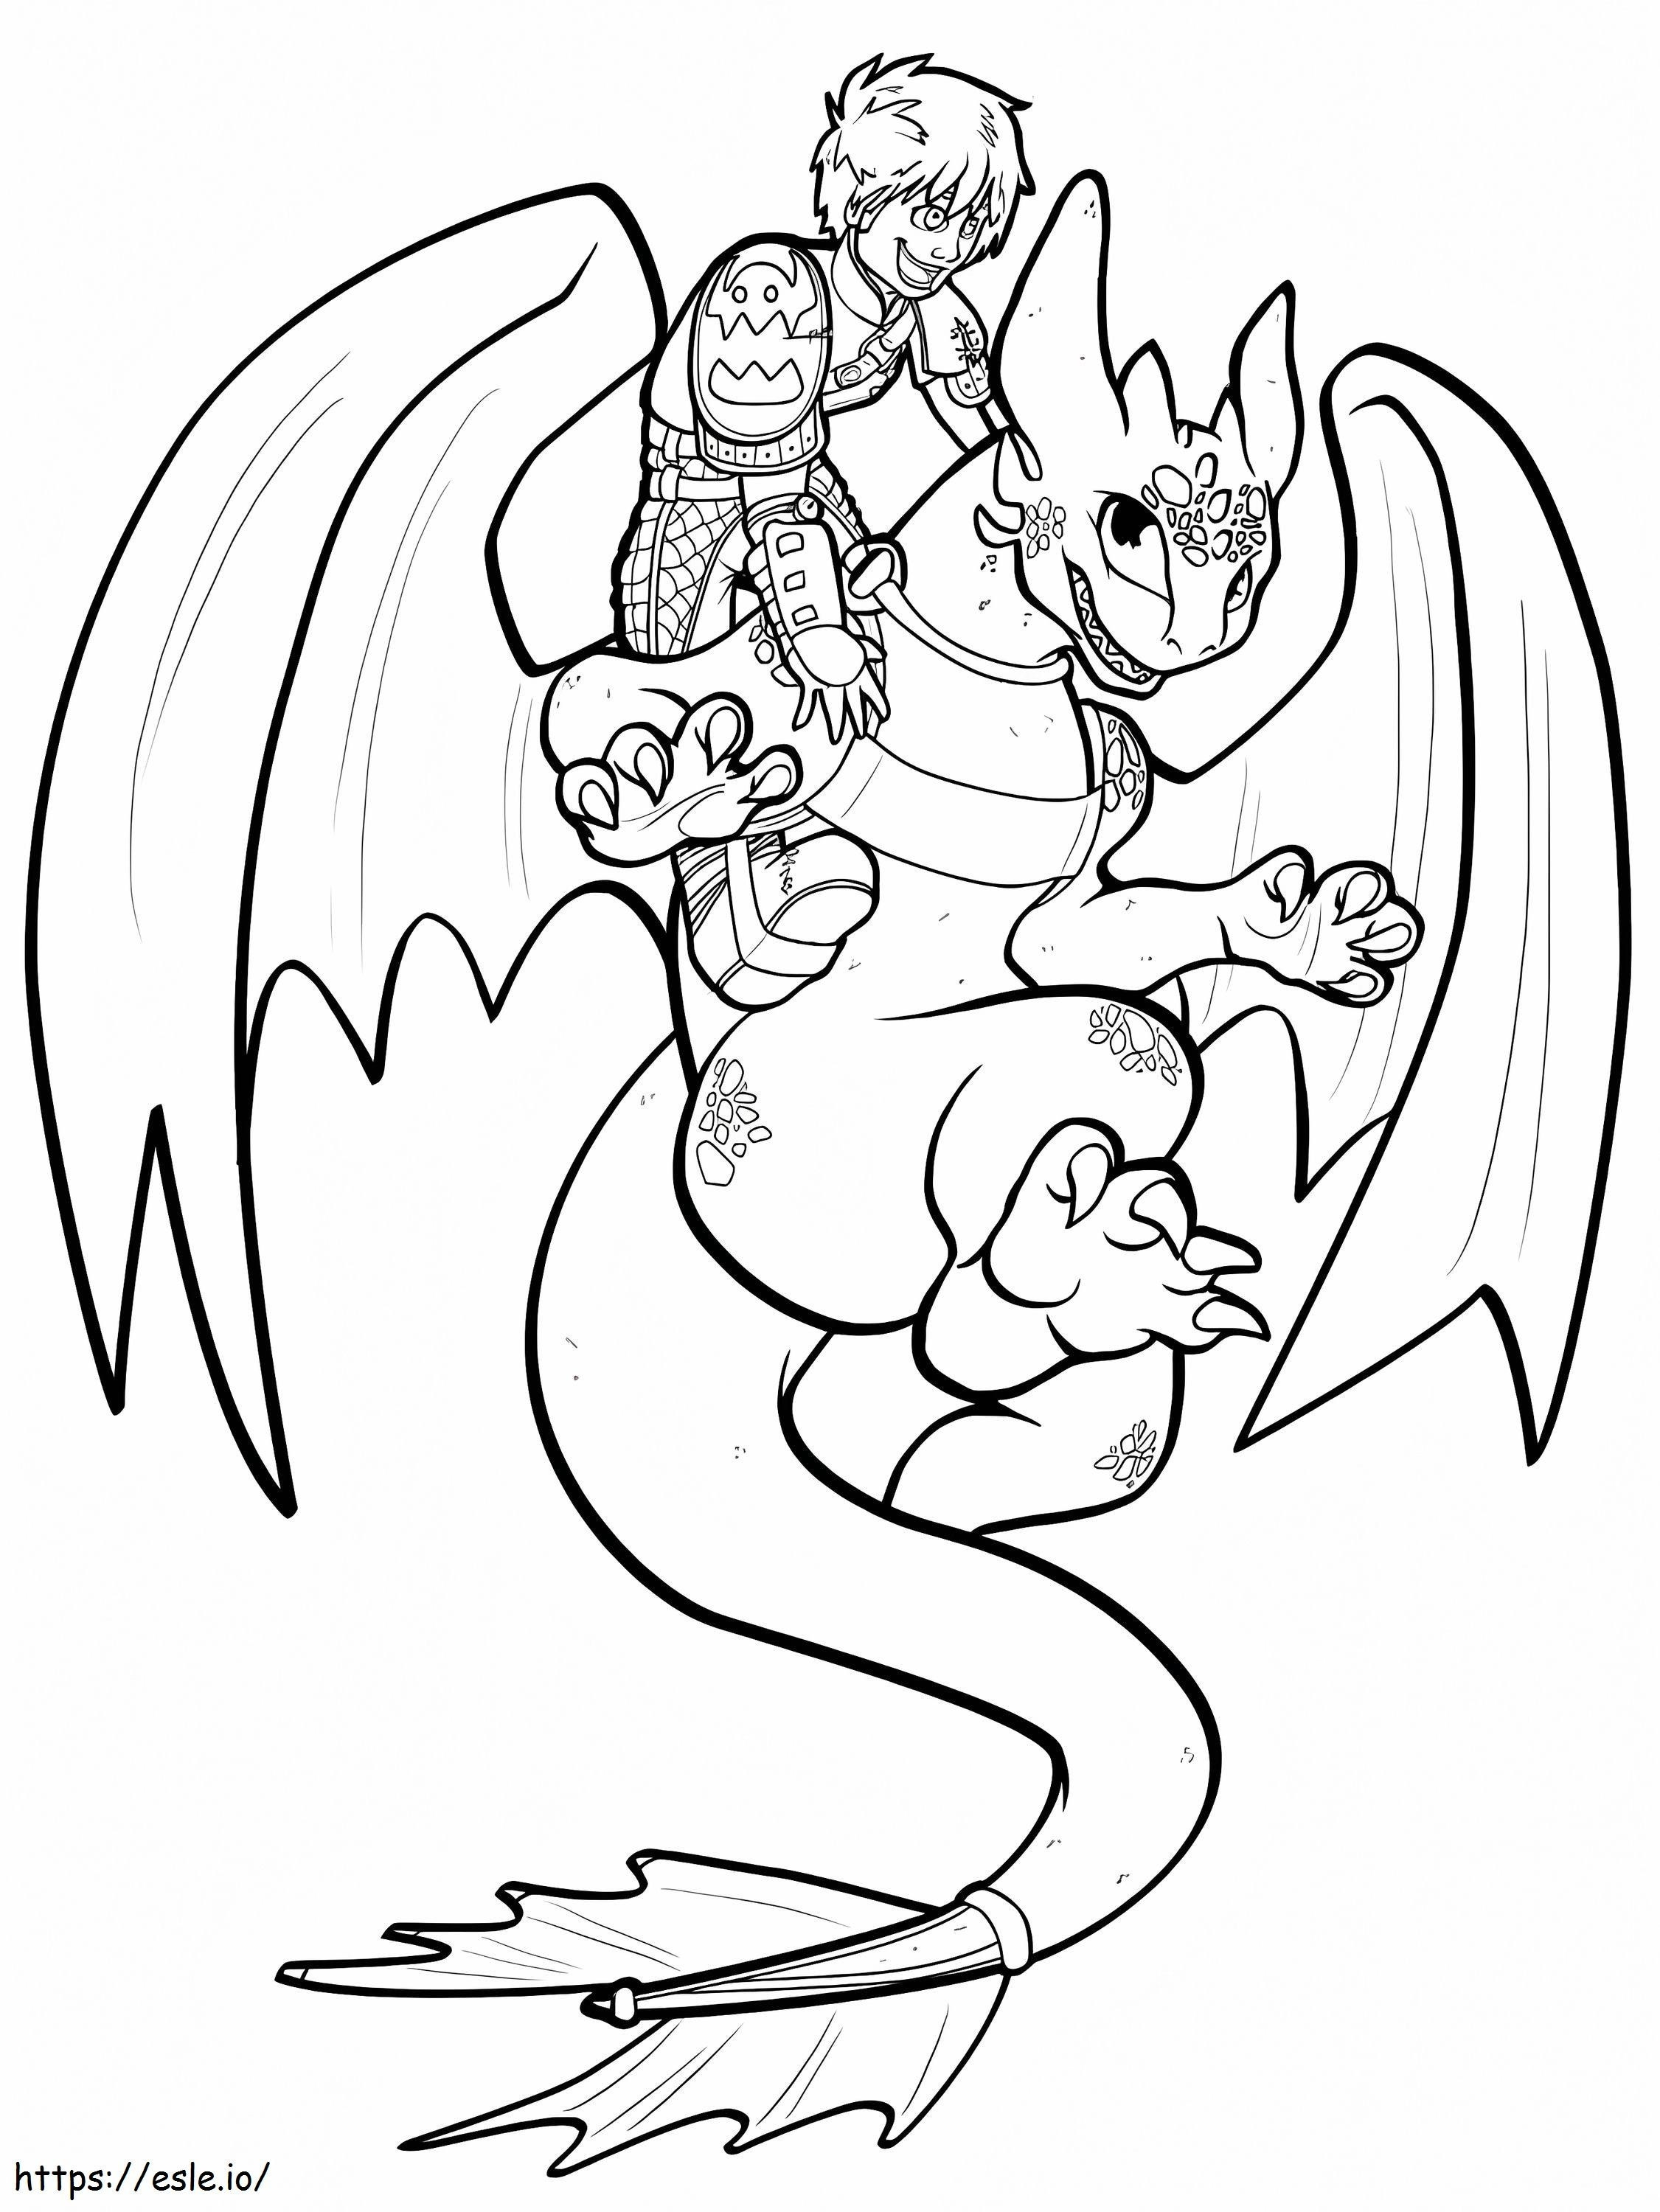 Hiccup Smiling With Toothless coloring page